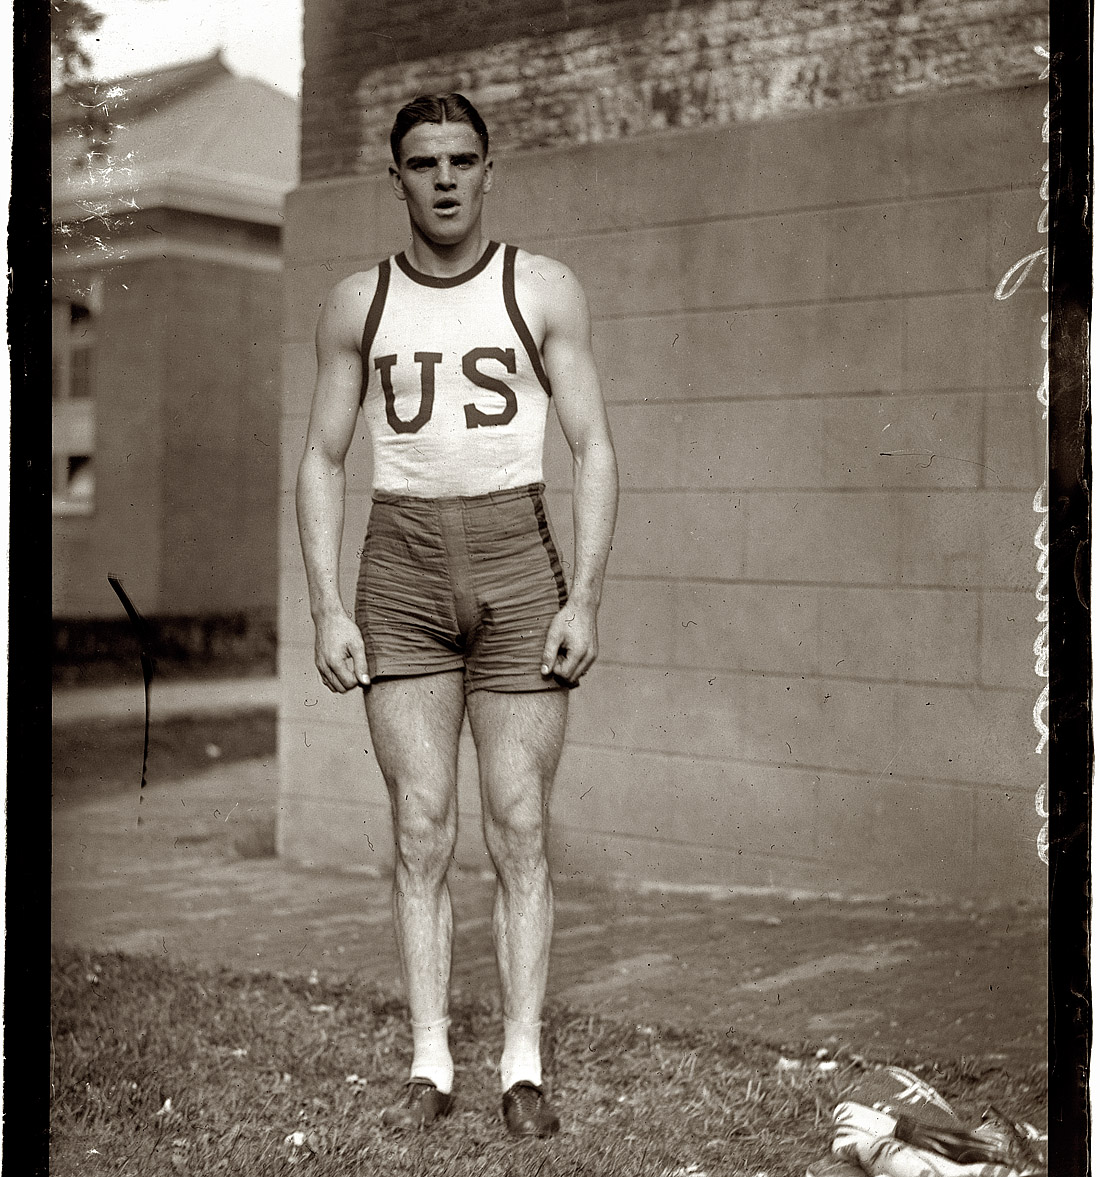 "Bob Le Grende [Legendre], Georgetown, 1919. The track and field star may be one of America's representatives at the Olympic Games at Antwerp next summer. He recently won the pentathlon title at the inter-allied meet in Pershing Stadium, Paris." As it turns out, his life was tragically cut short by illness. View full size.